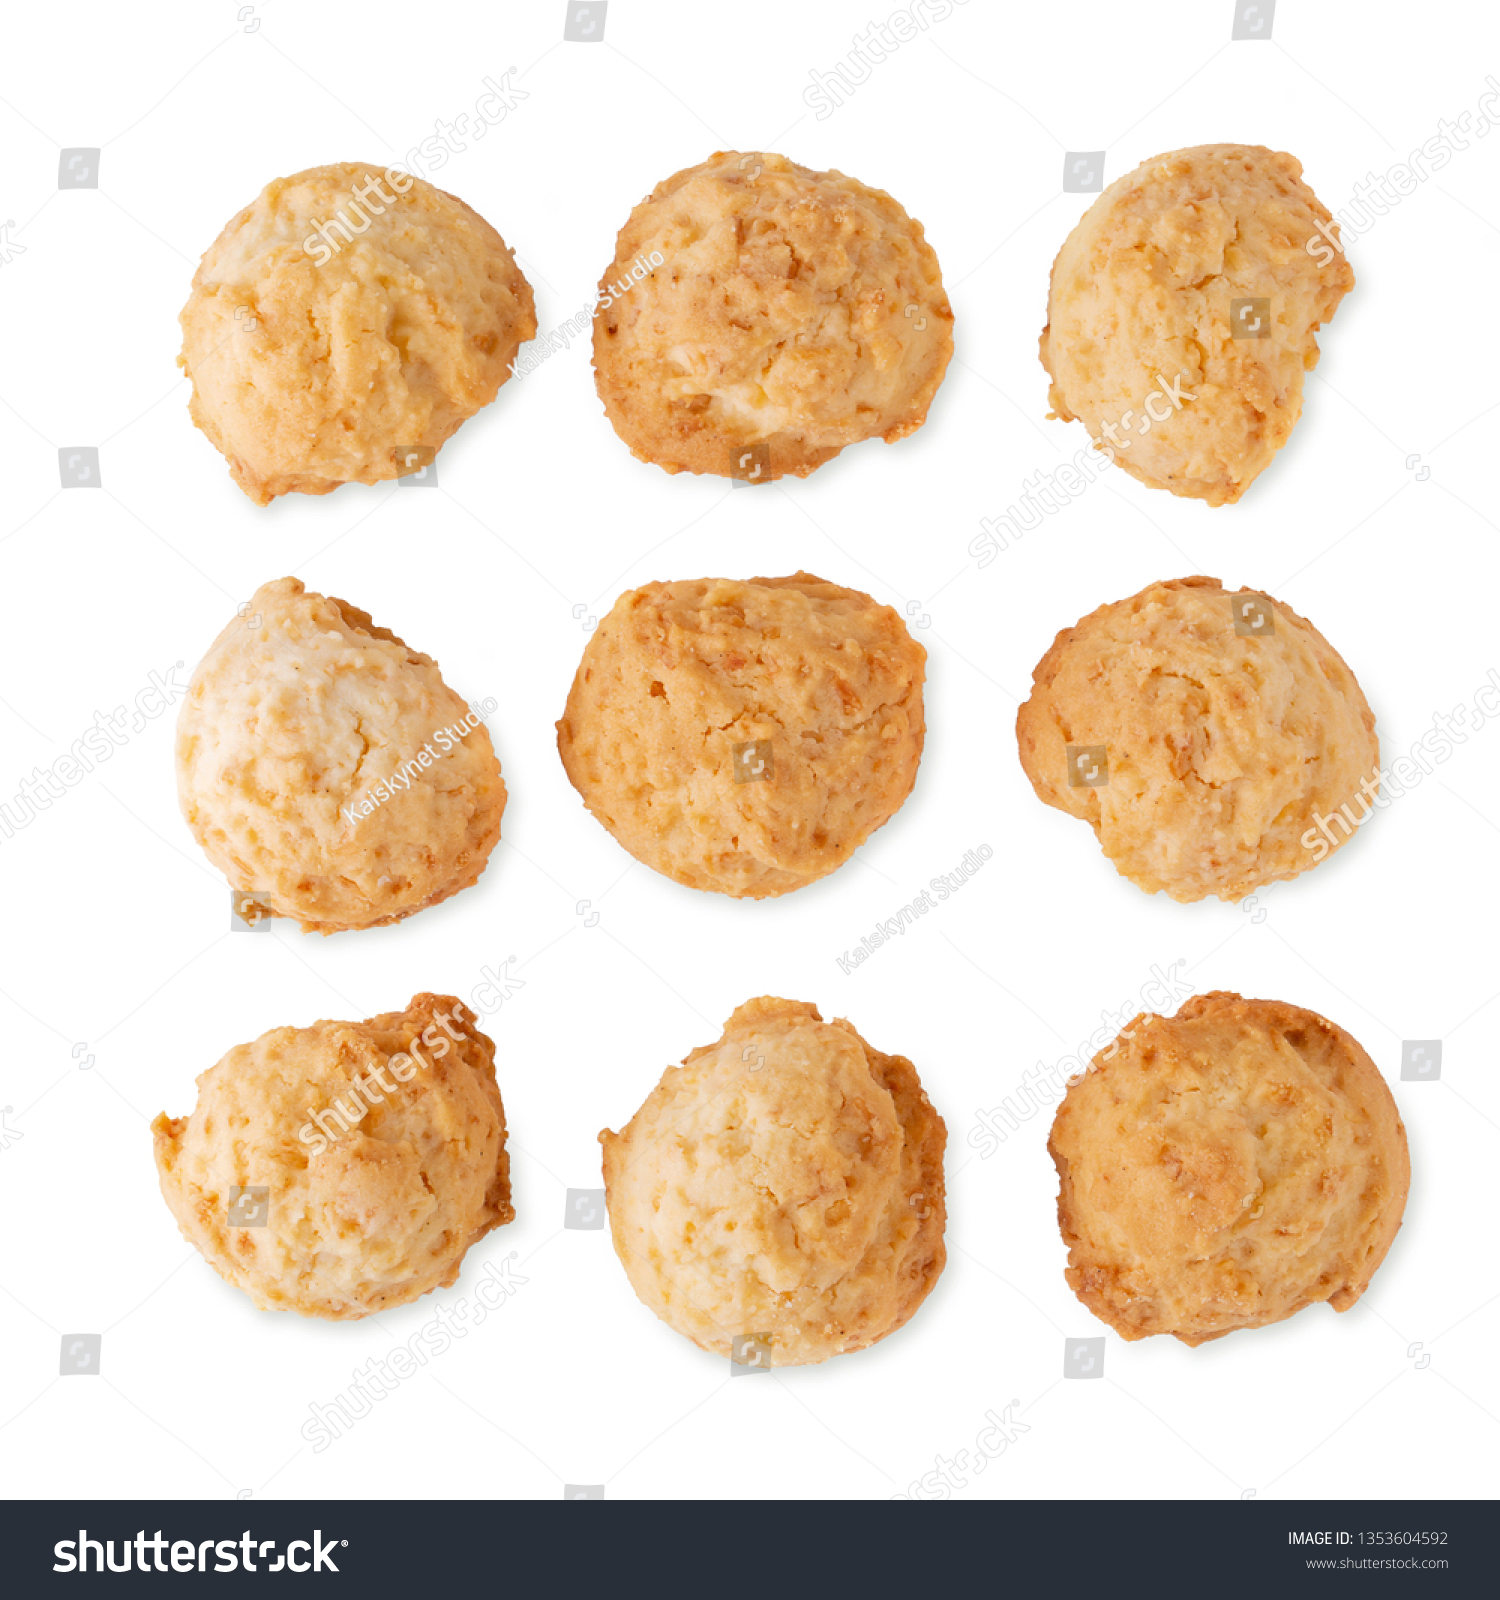 Delicious Coconut cookies isolated on a white background #1353604592